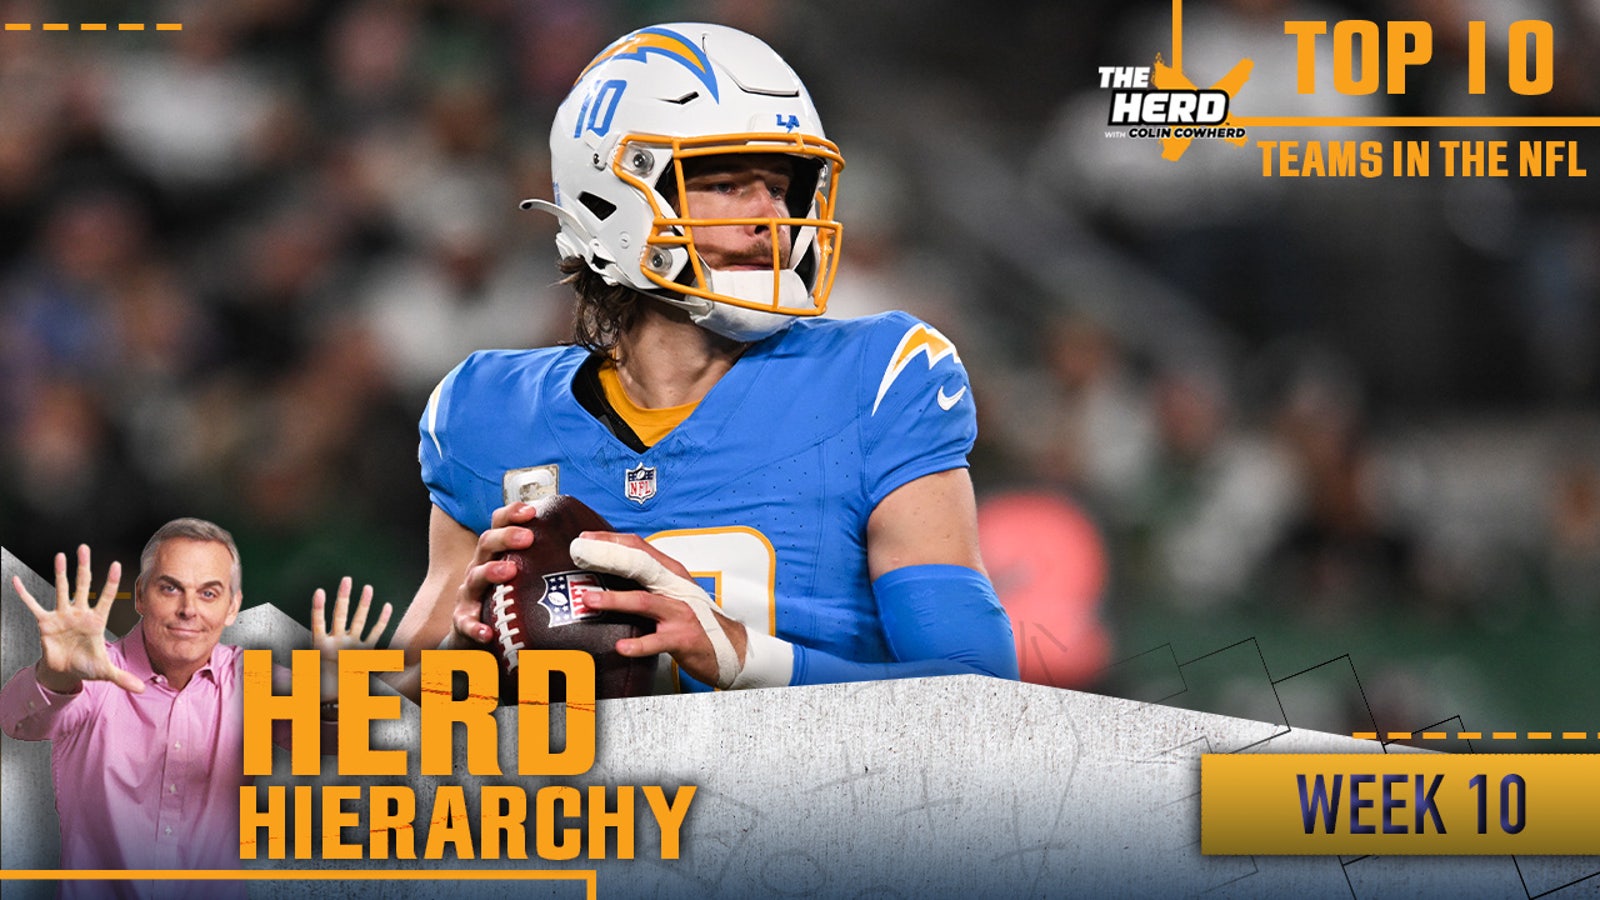 Herd Hierarchy: Chargers return, Ravens remain at top